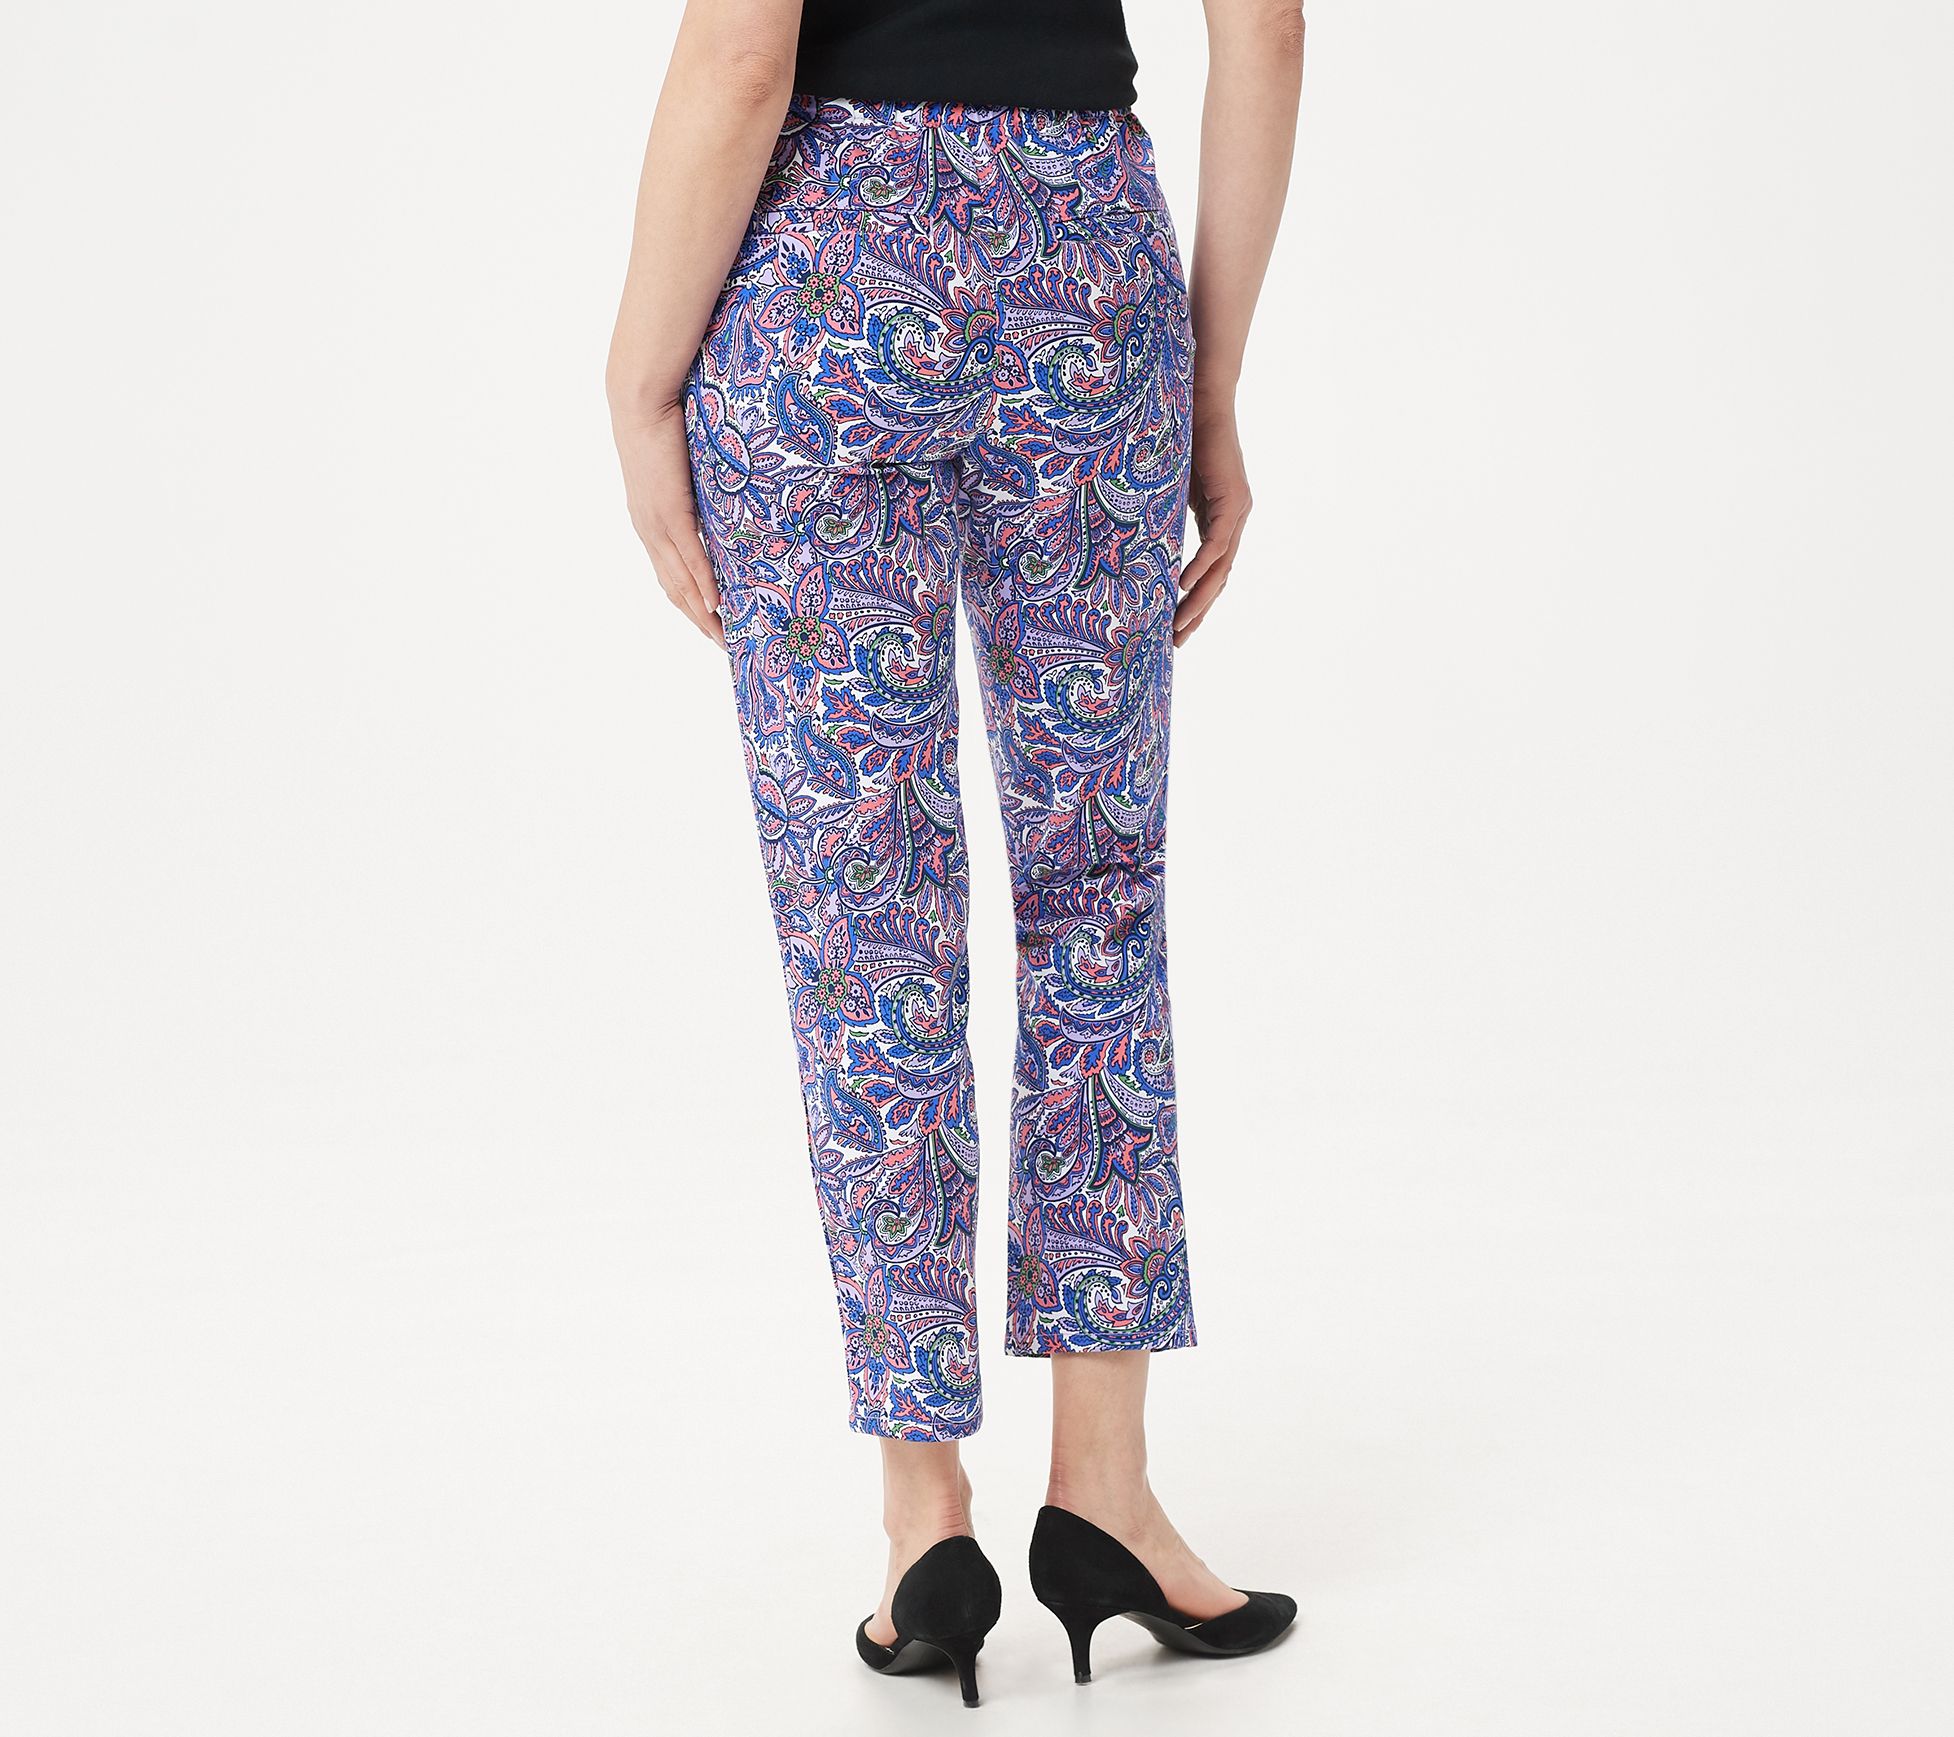 Isaac Mizrahi Tall 24/7 Stretch Print Solid Ankle Pants Black 20 NEW A302698 